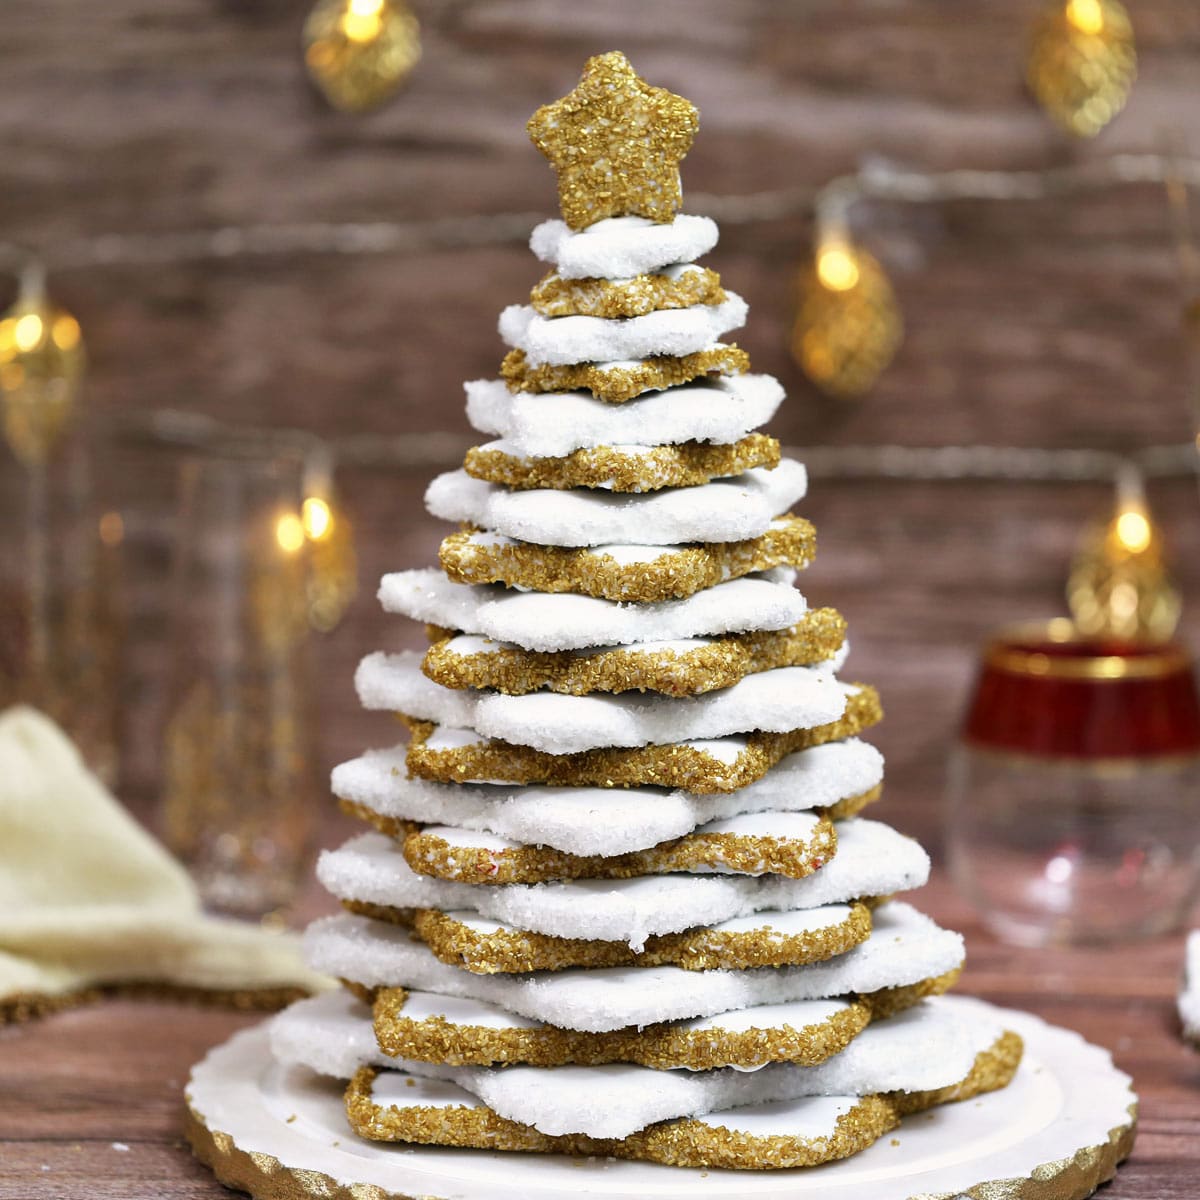 https://www.sugarhero.com/wp-content/uploads/2016/12/gingerbread-christmas-cookie-tree-9-sq-featured-image.jpg